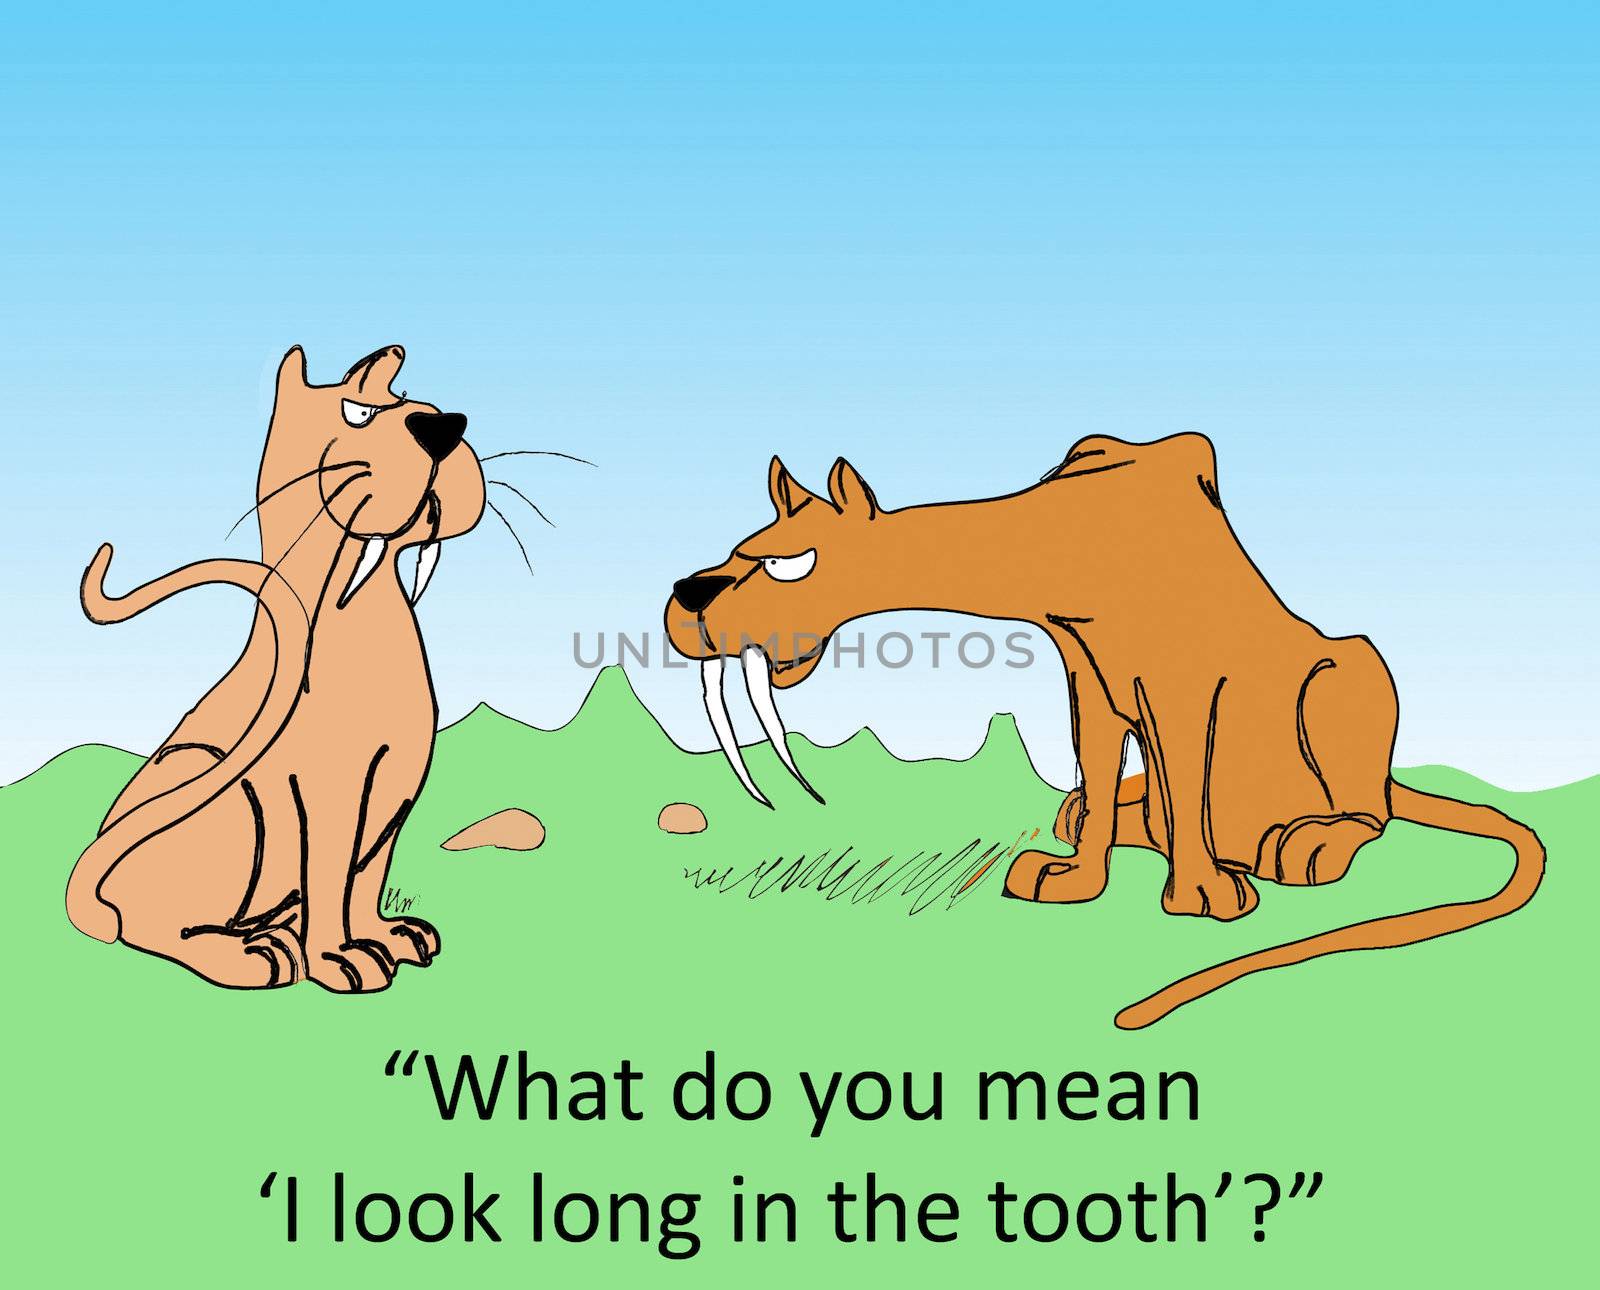 "What do you mean 'I look long in the tooth'?"